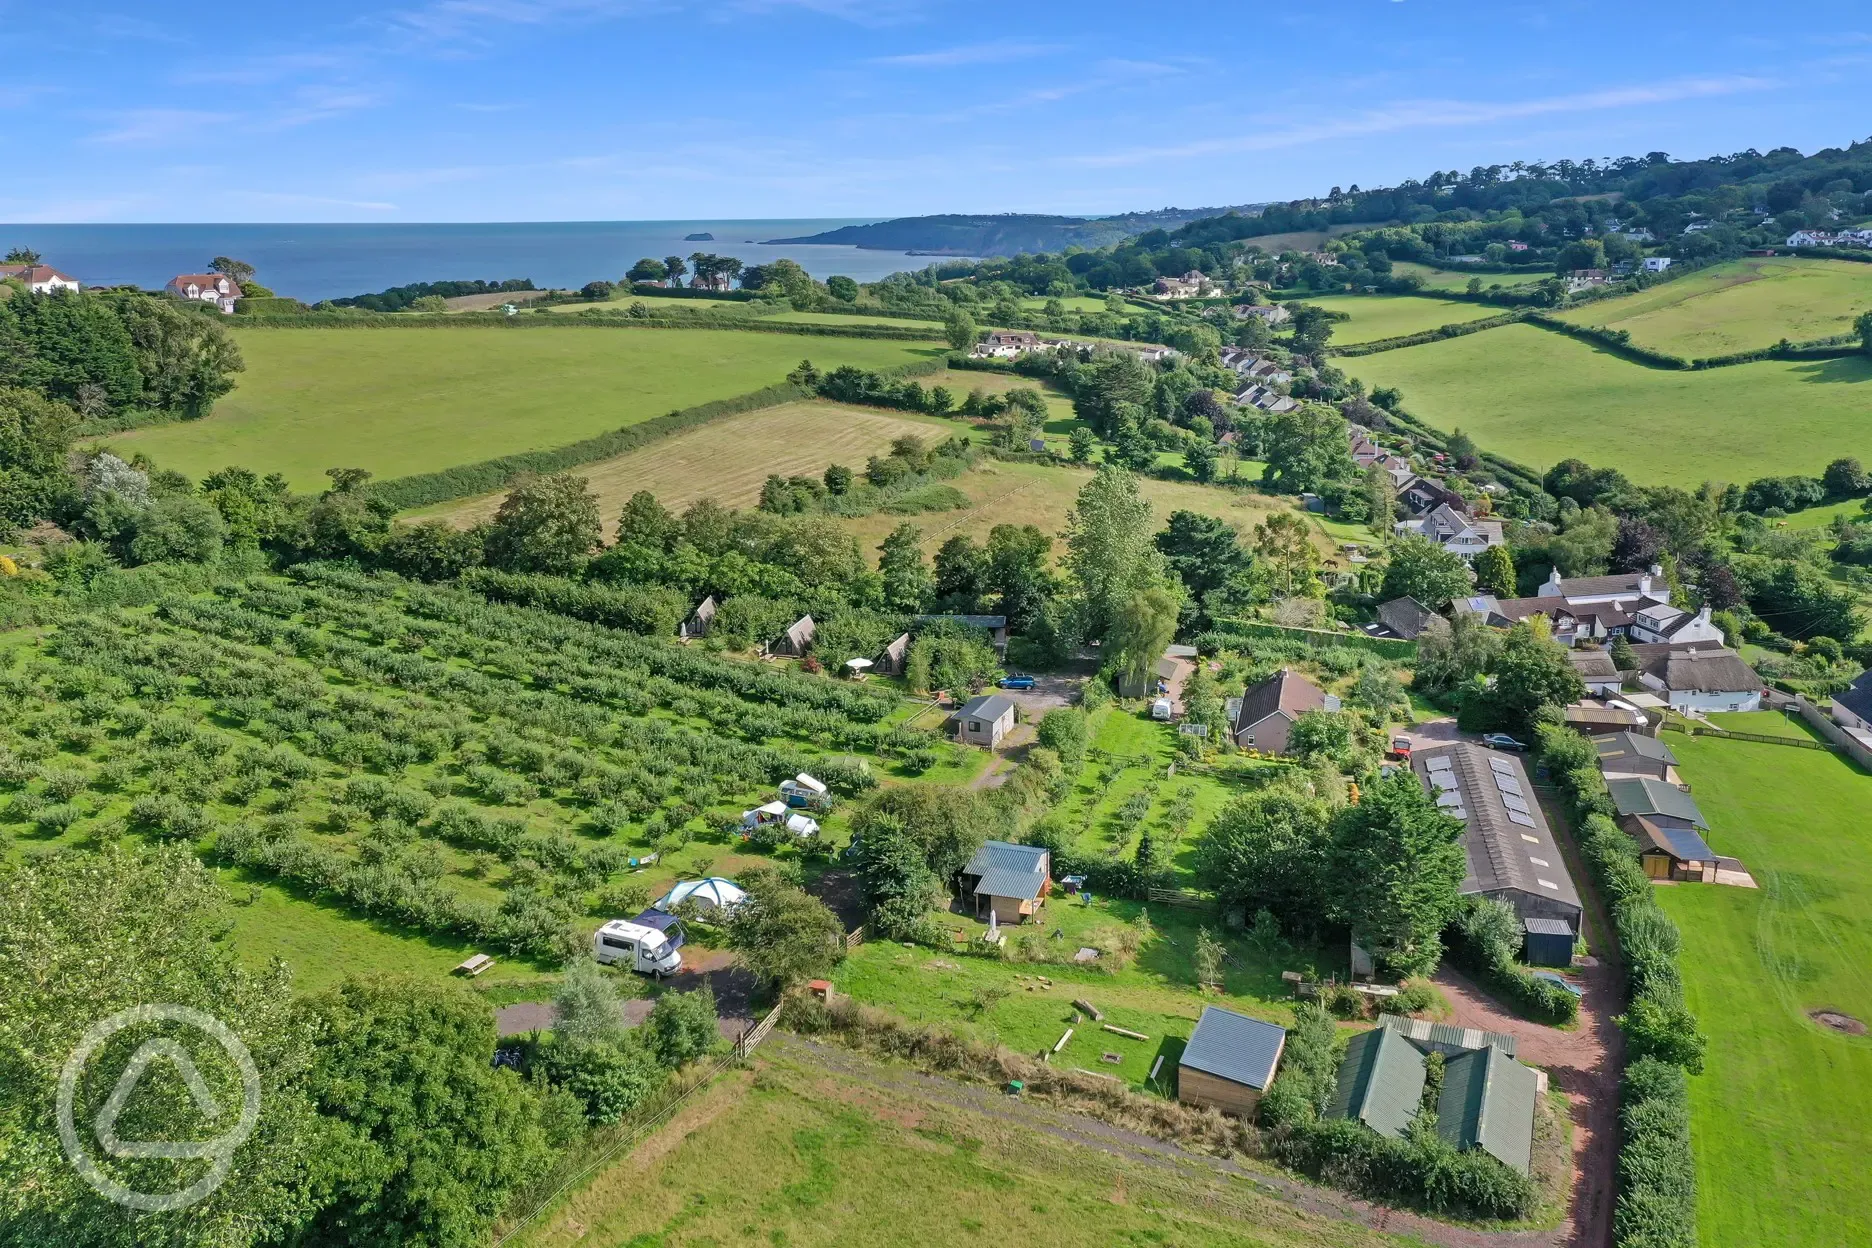 Aerial of the campsite with sea views